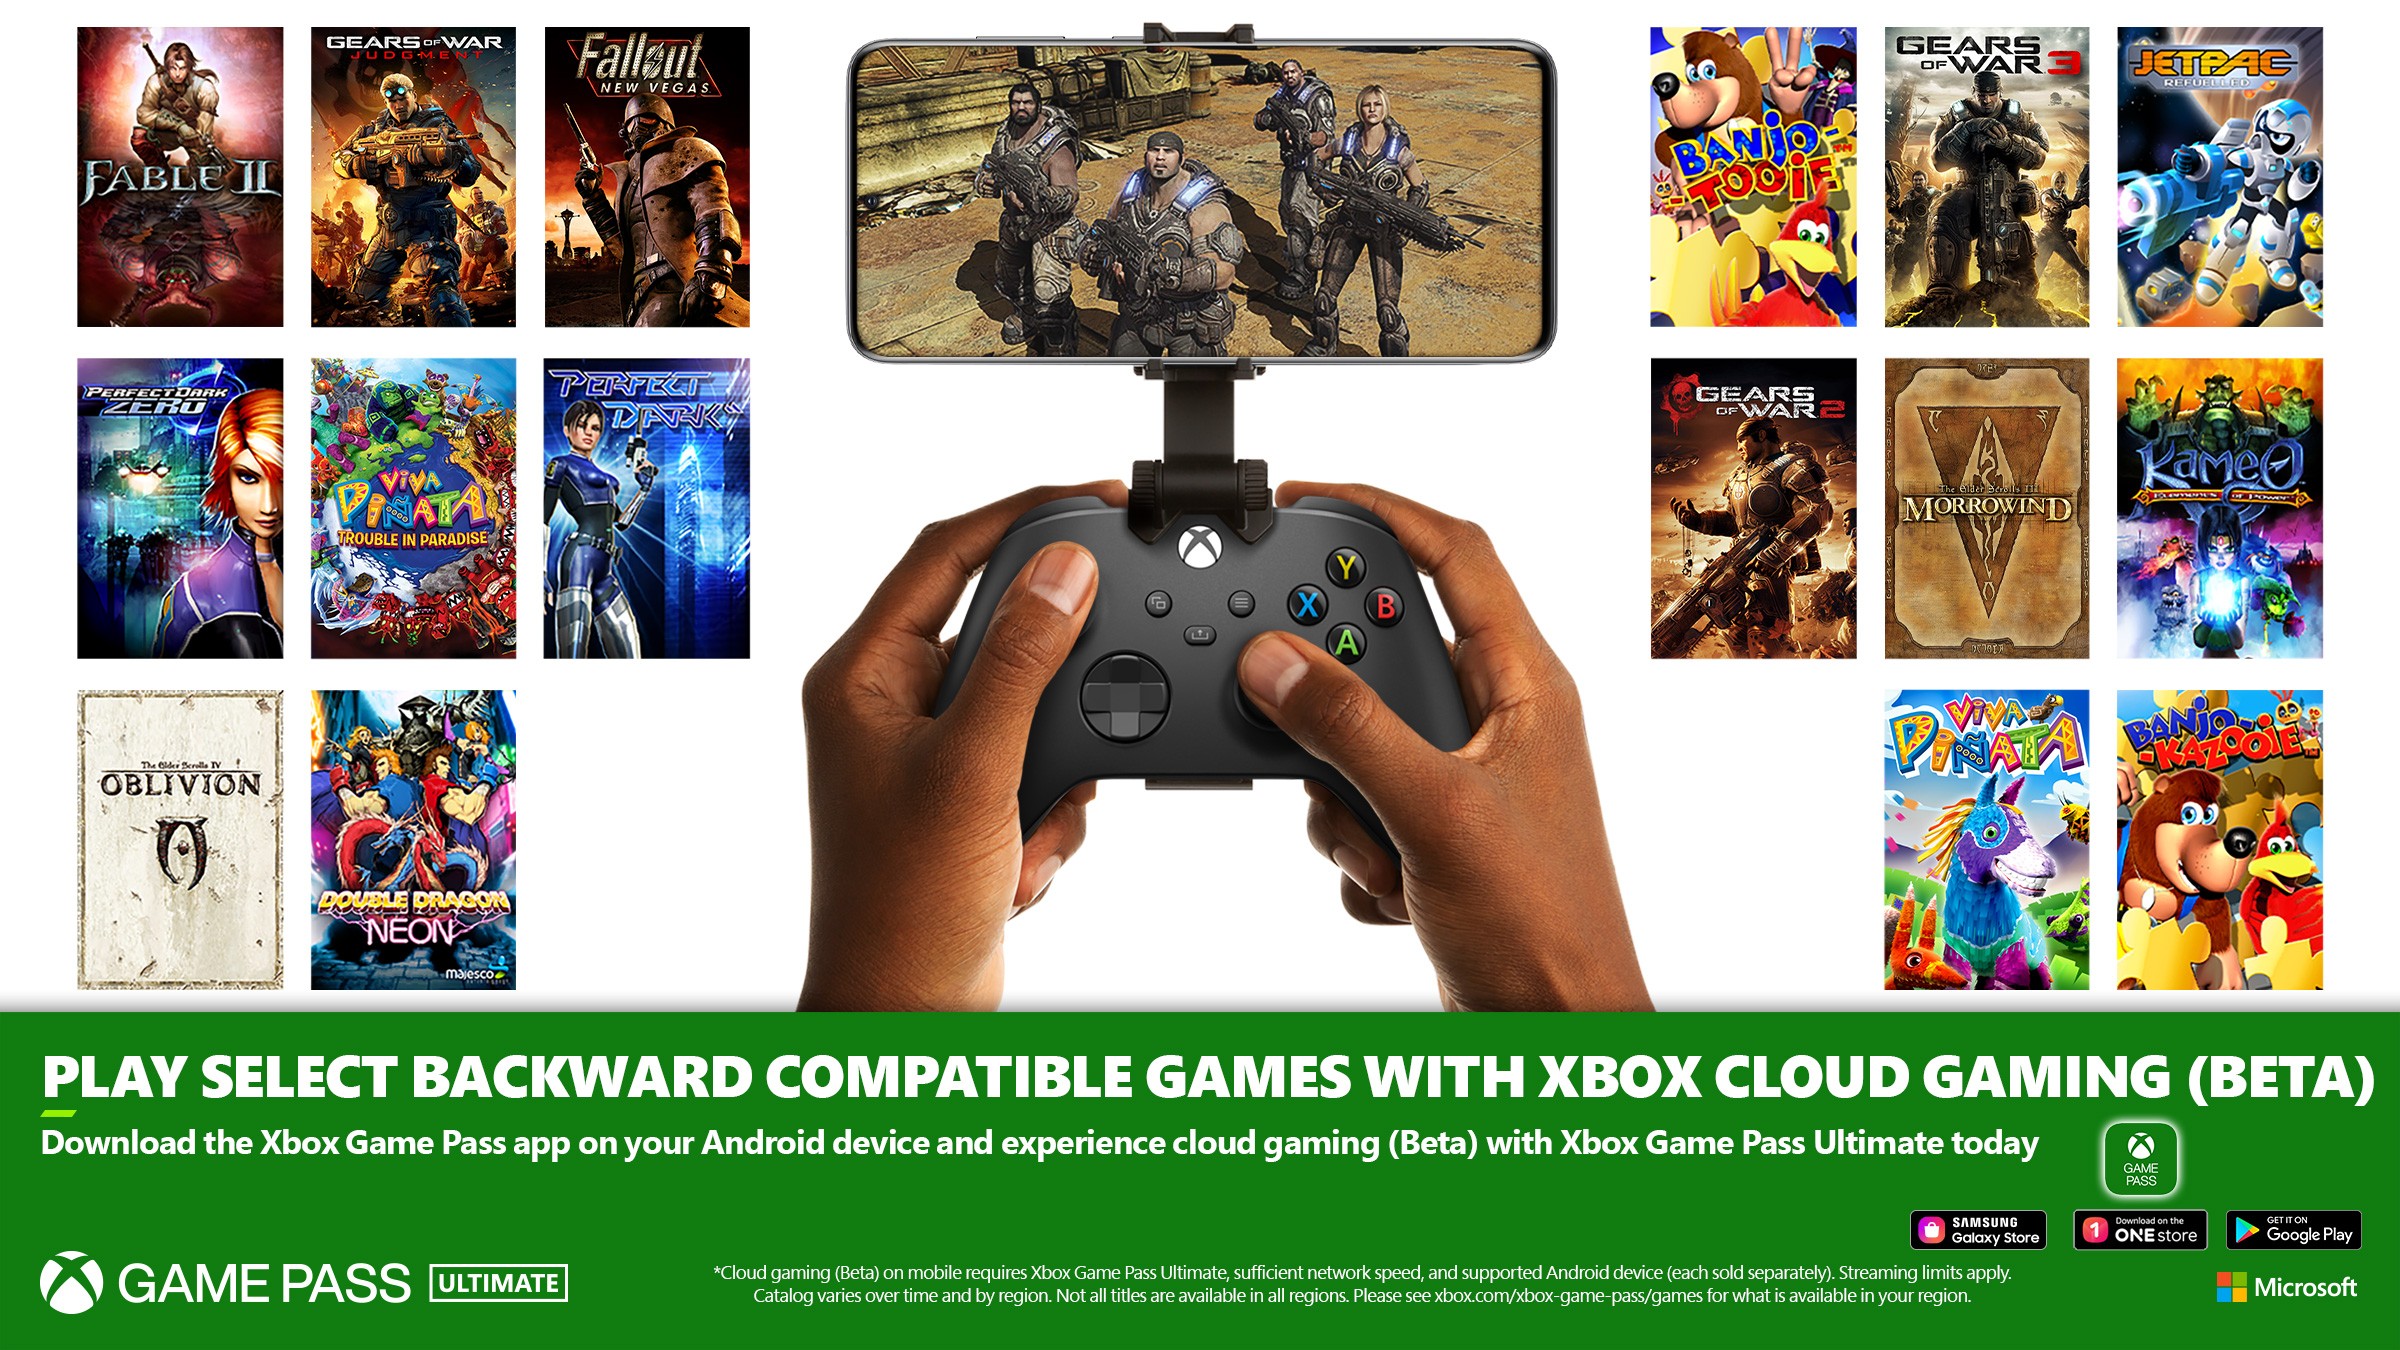 Backward Compatibility Reaches the Clouds